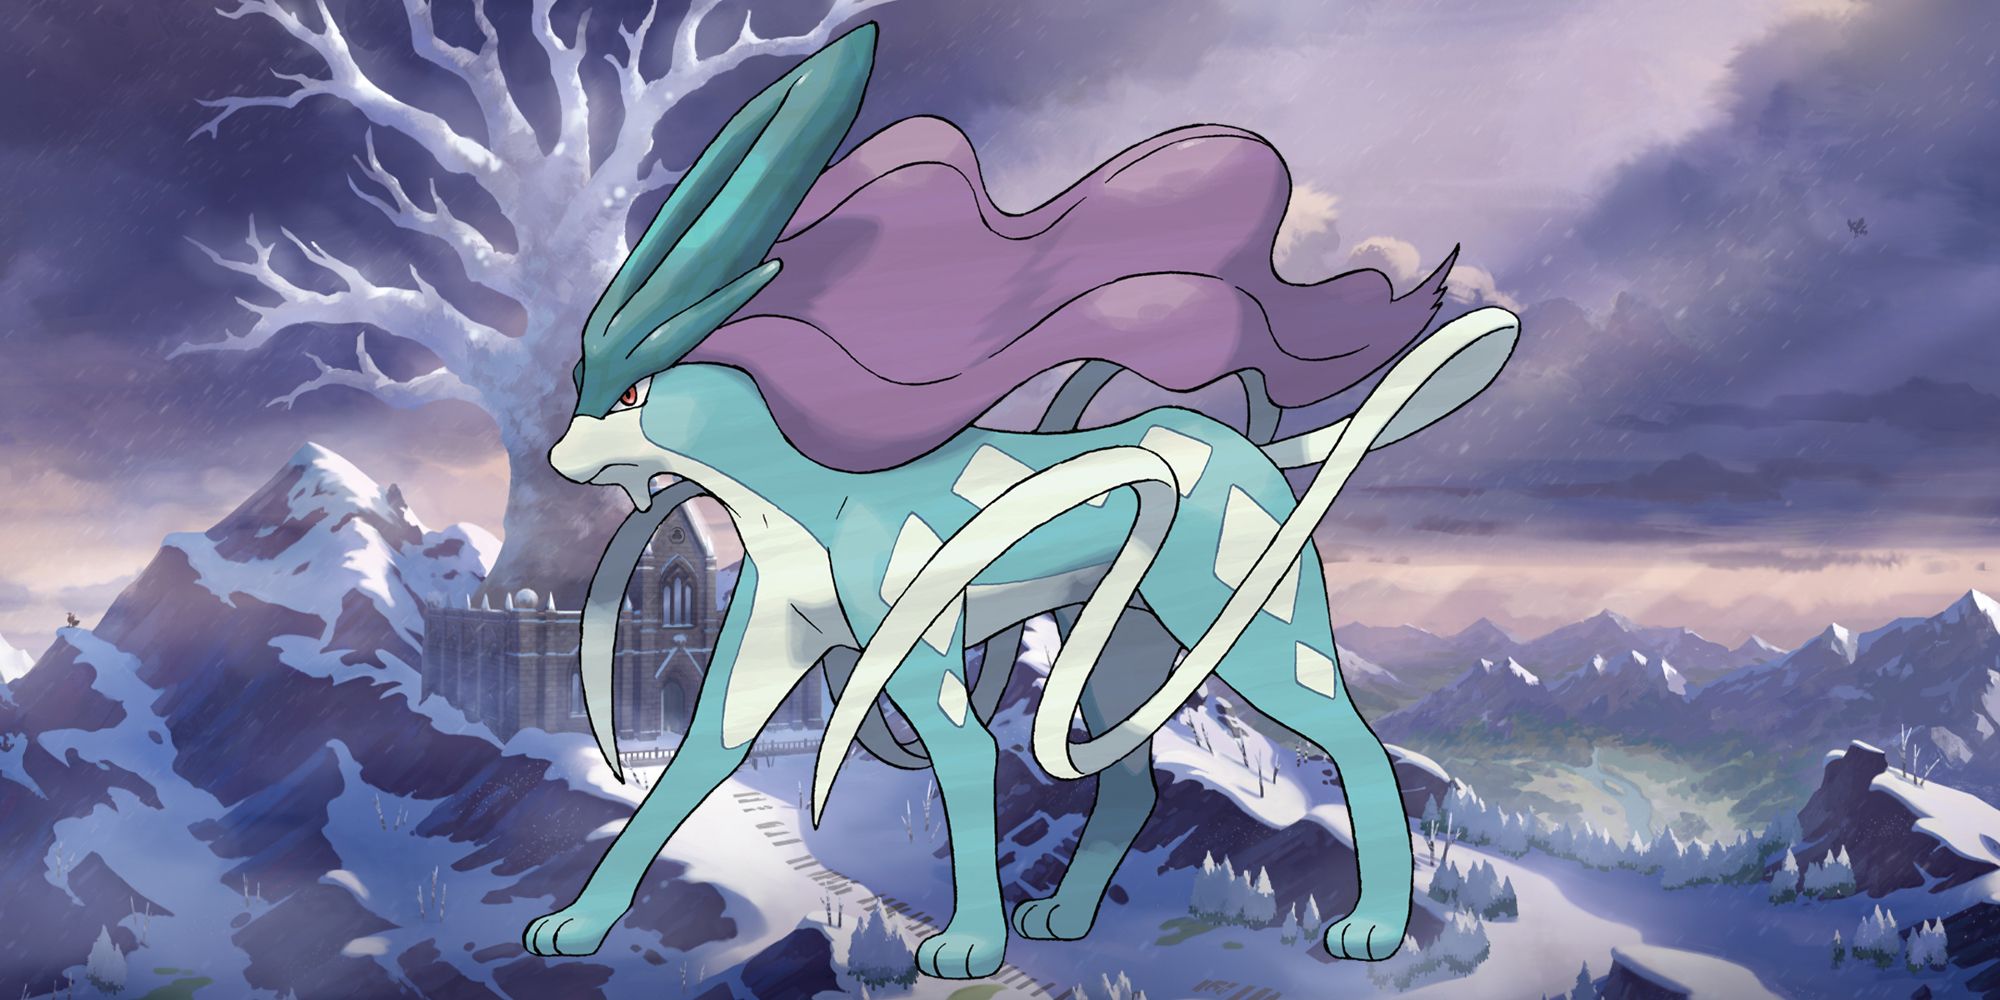 How to Find (& Catch) Legendary Suicune in Pokémon Crown Tundra DLC